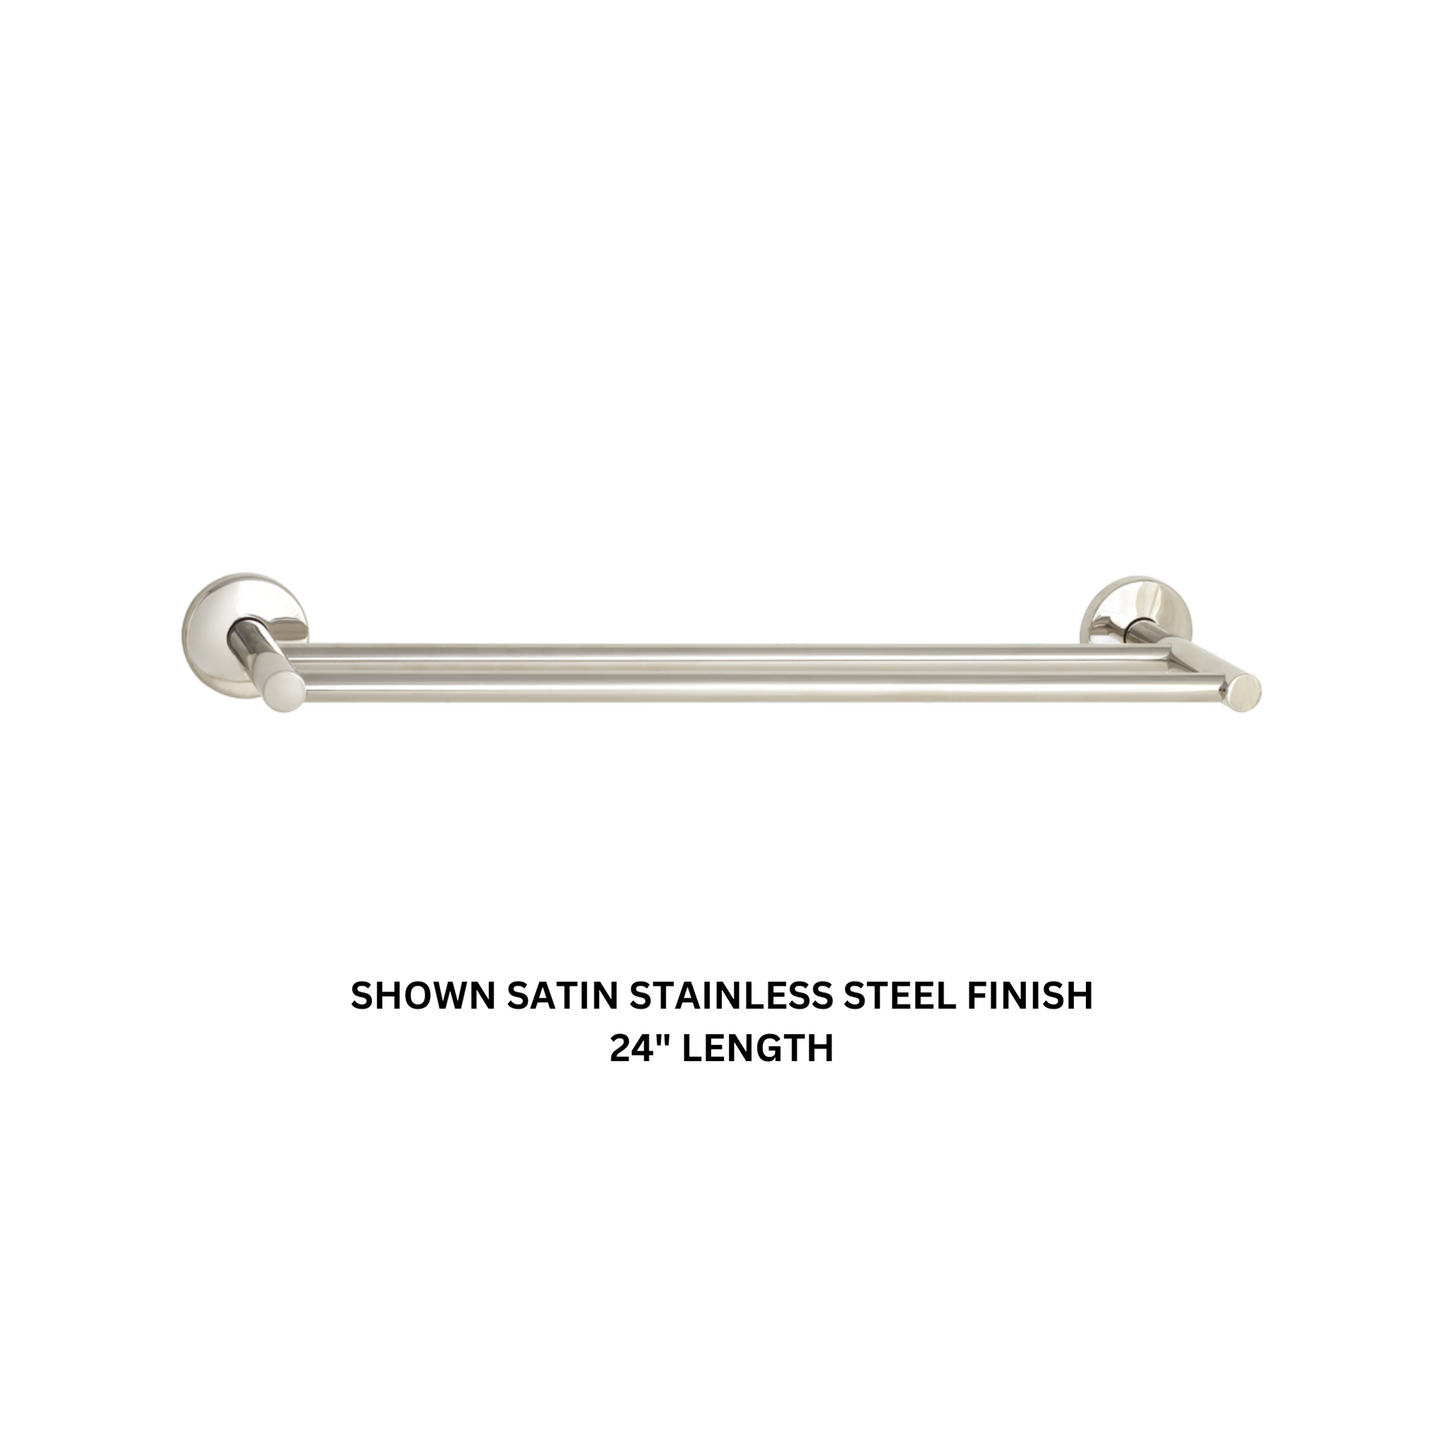 Seachrome Conorado Series 18" Satin Nickel Powder Coat Concealed Mounting Flange Double Towel Bar